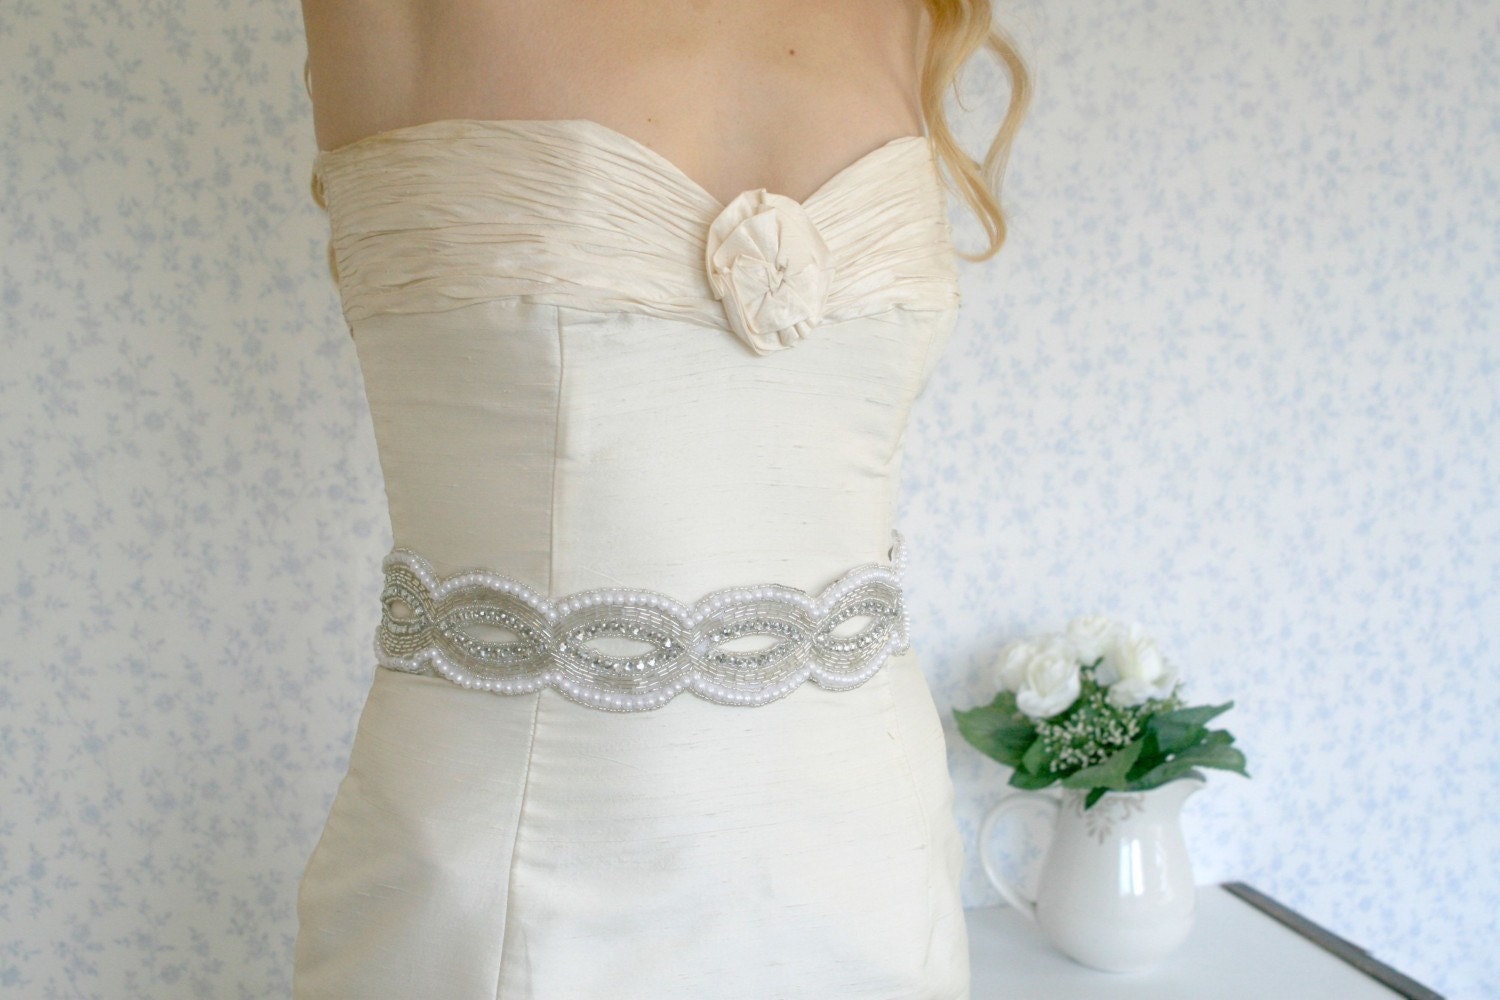 Crystals pearls and glass beads silvery sash or headband